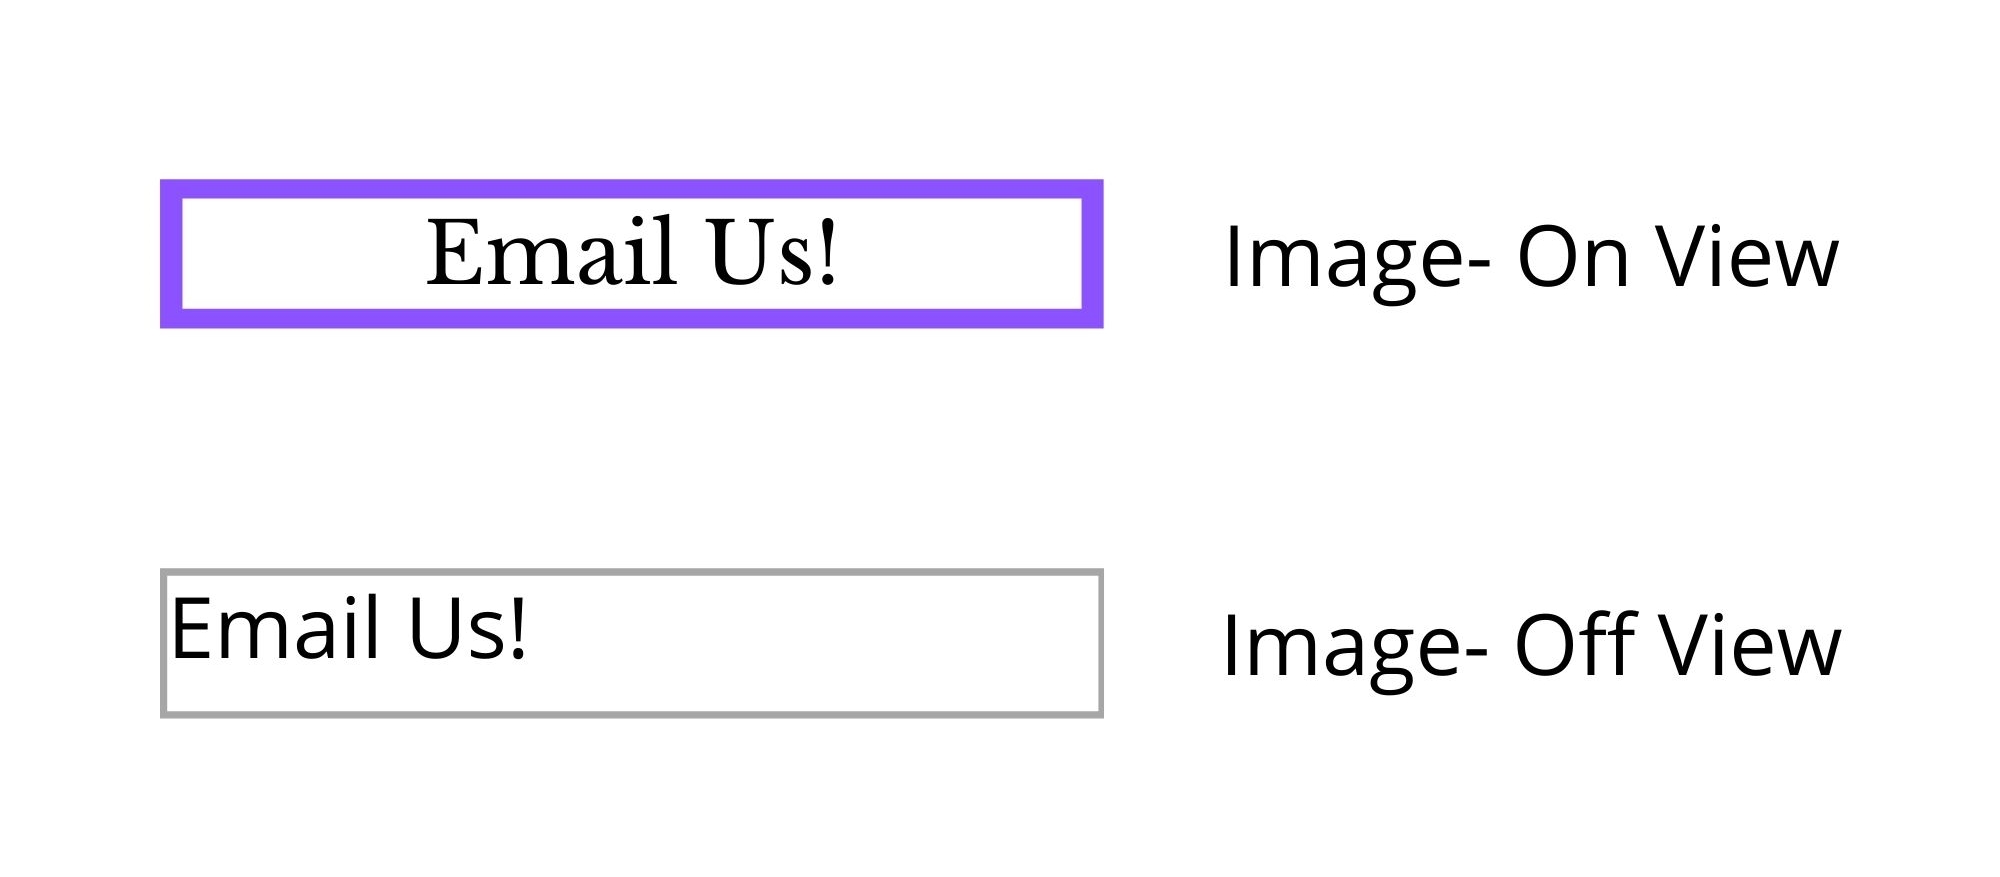 Add email button- Image sample